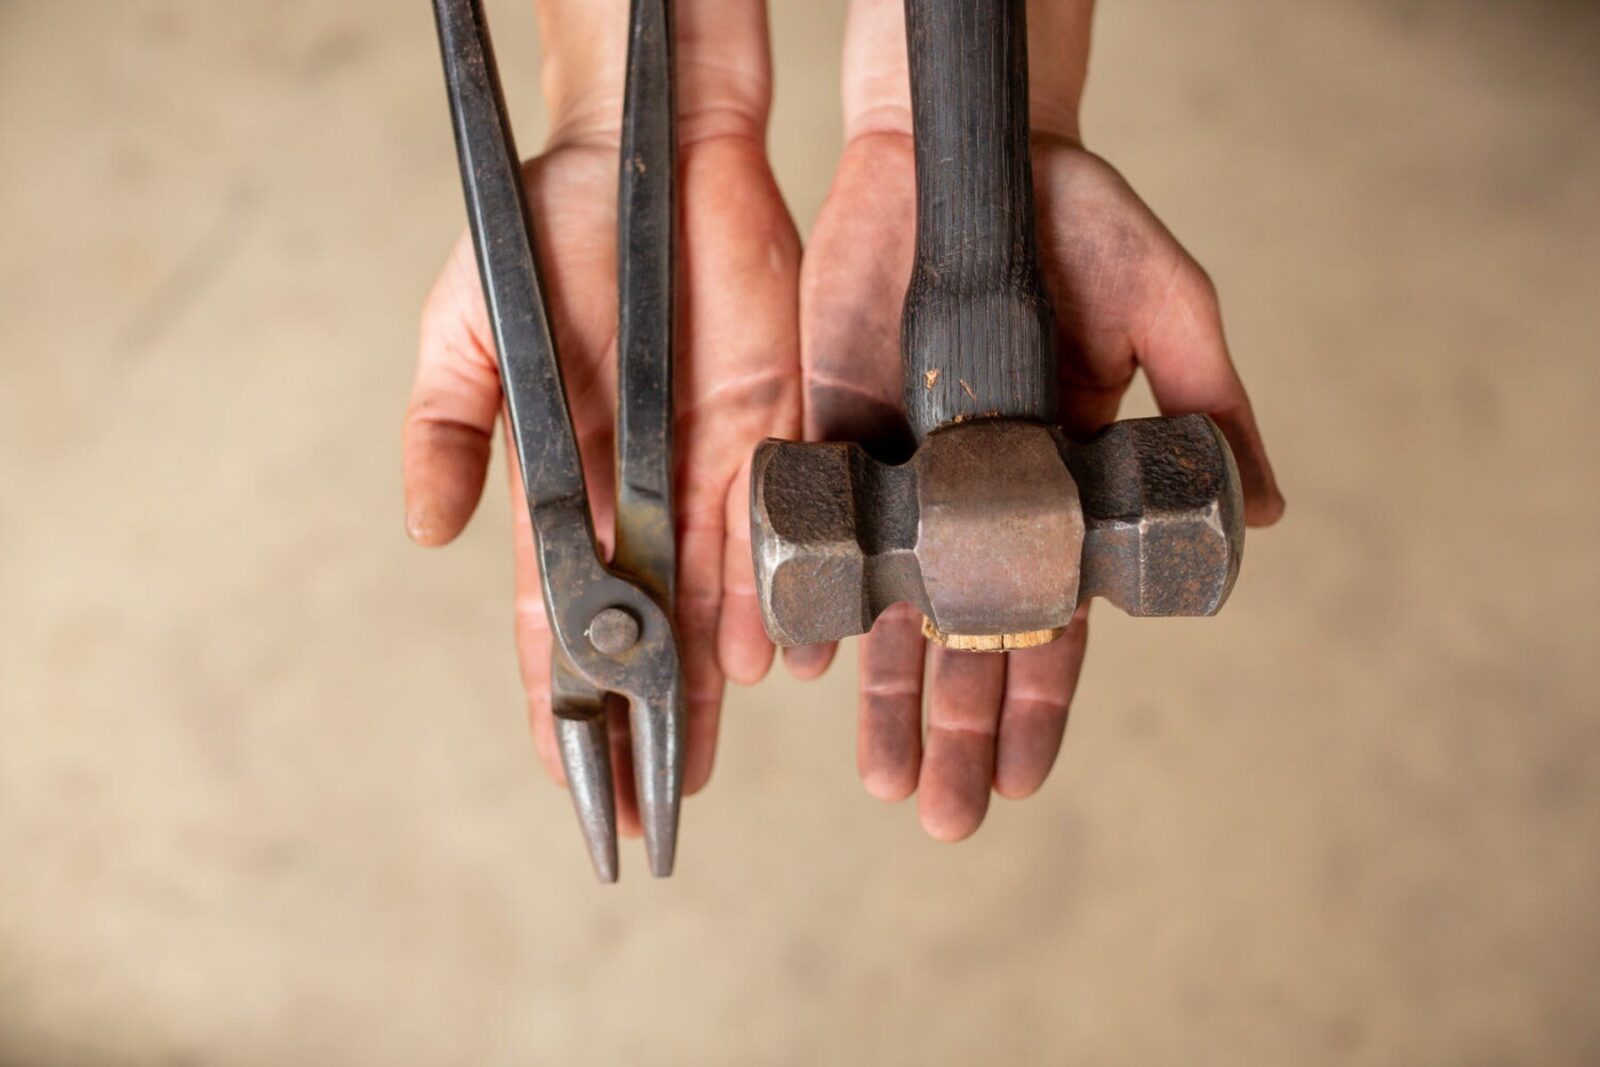 View from above of hands open flat holding a hammer and plyers